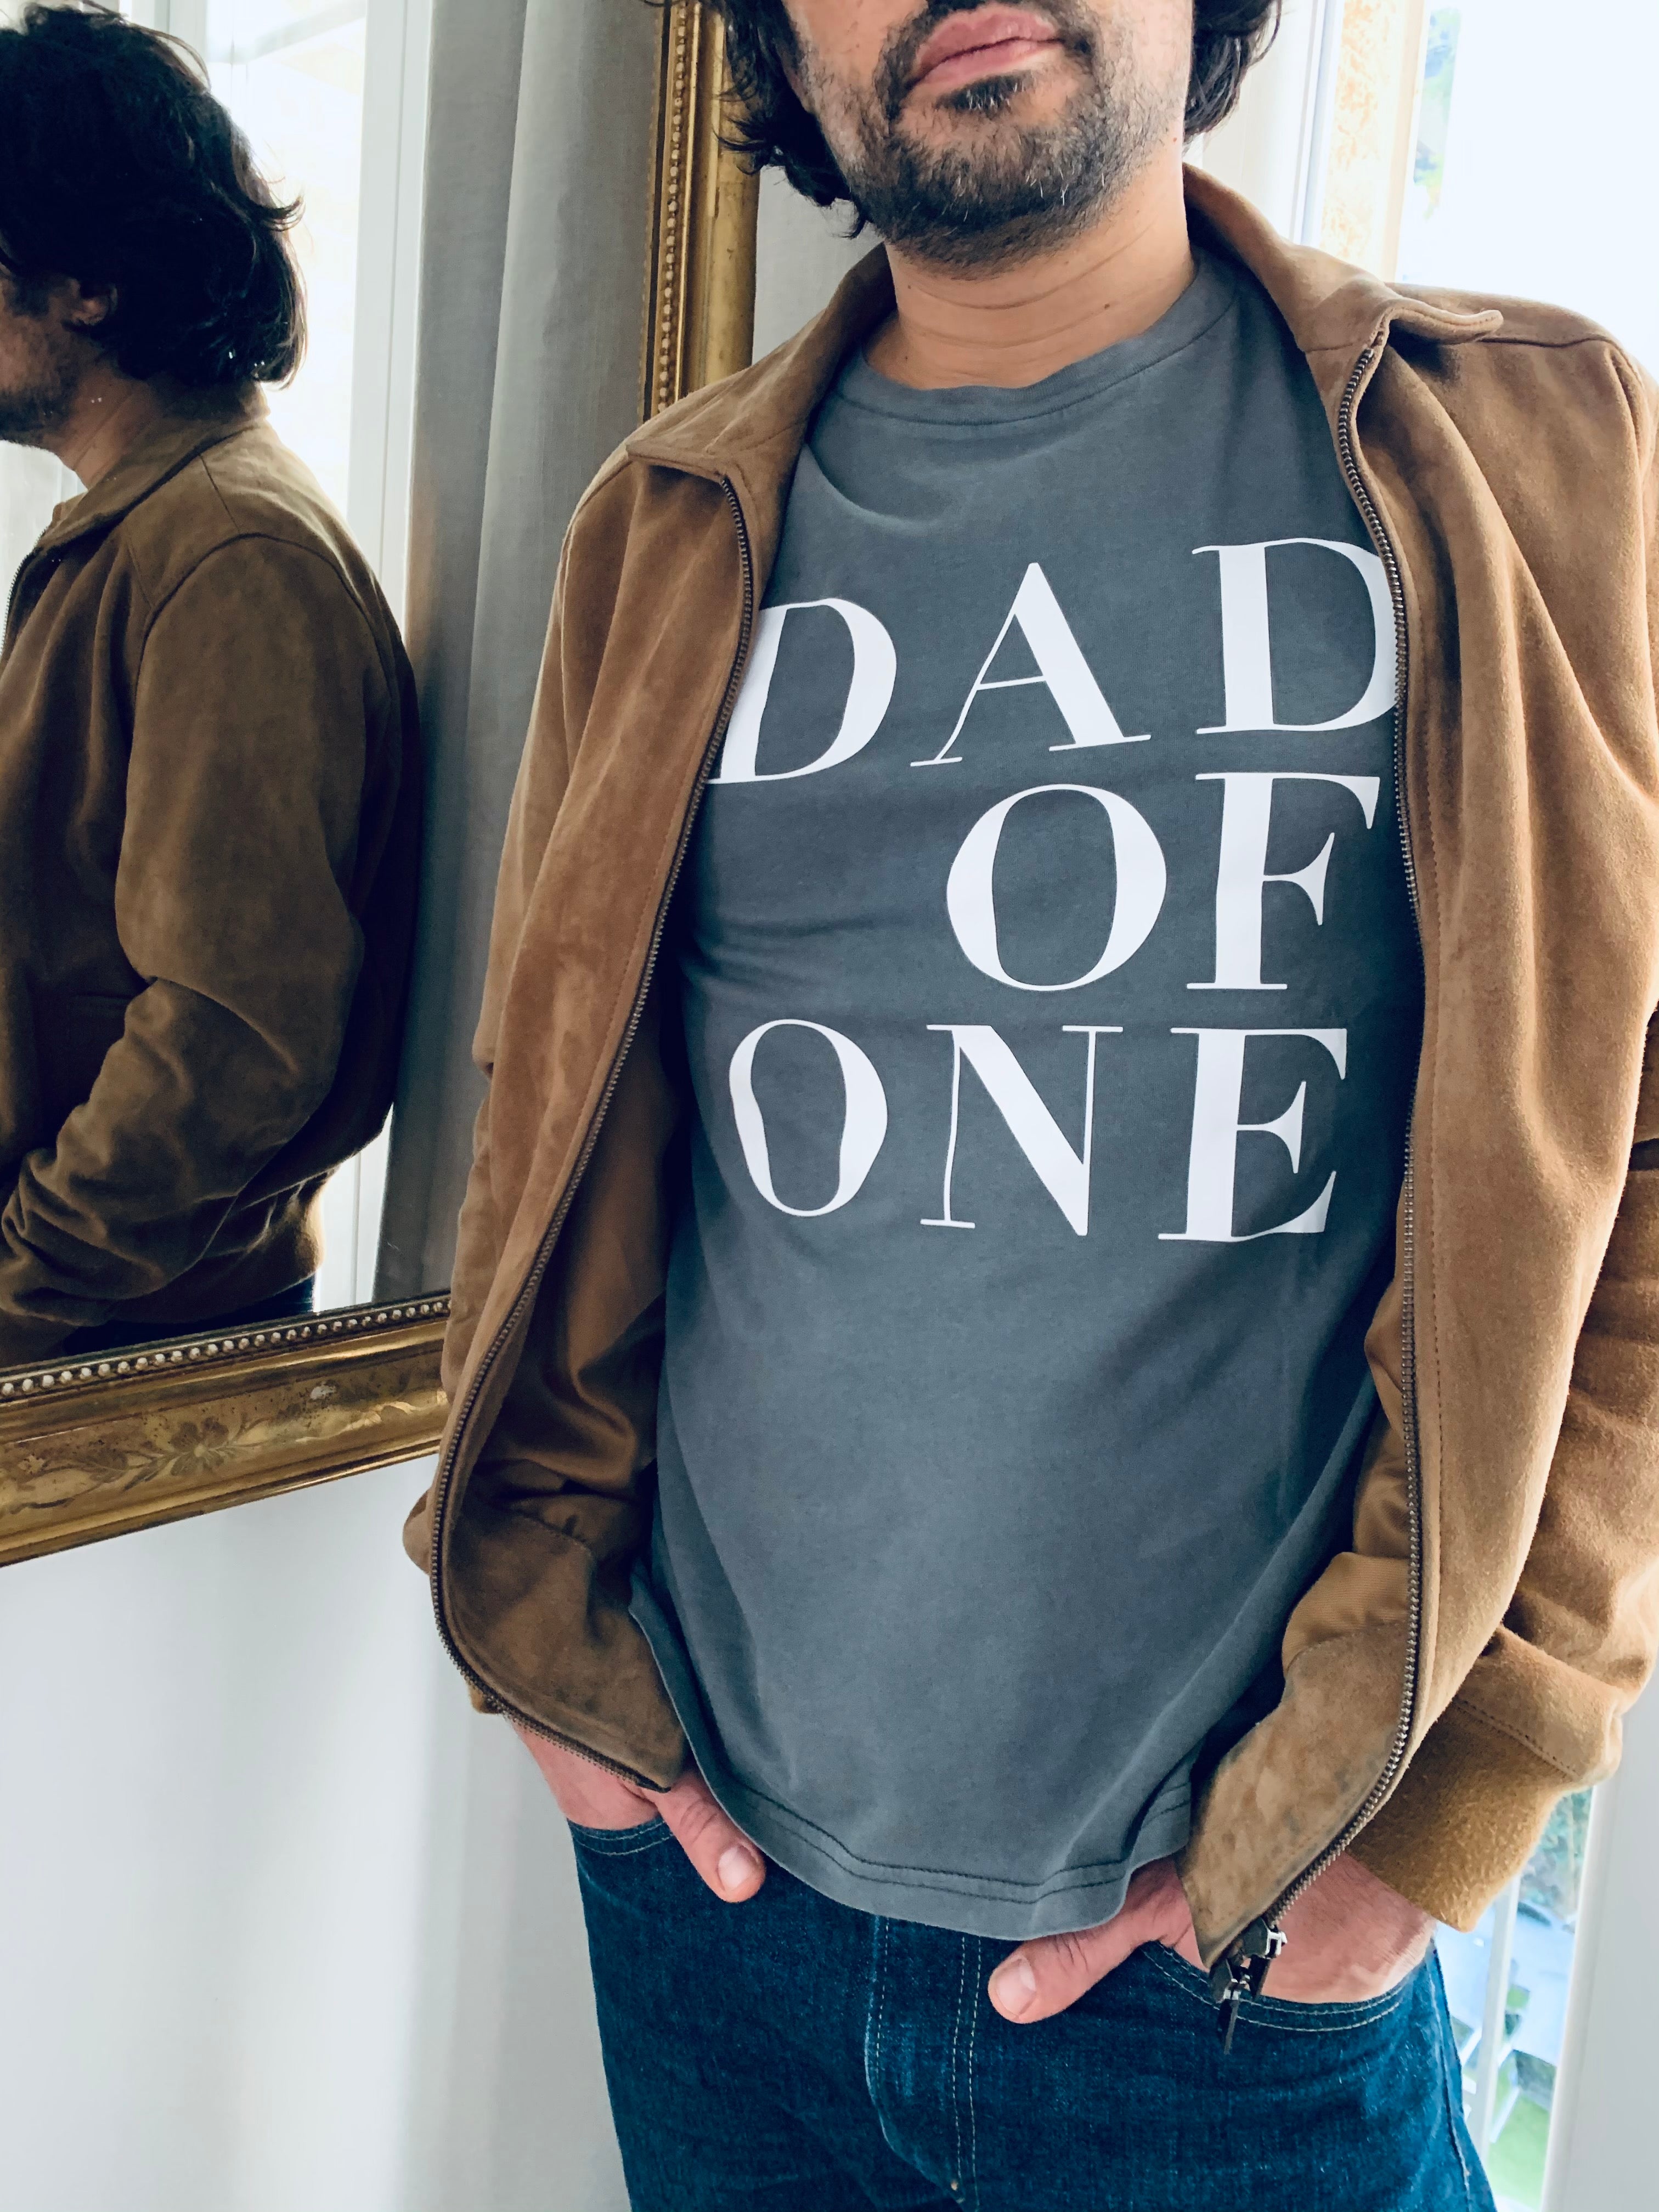 VINTAGE ANTHRACITE T-SHIRT DAD OF ONE, DAD OF TWO, DAD OF THREE, DAD OF FOUR...